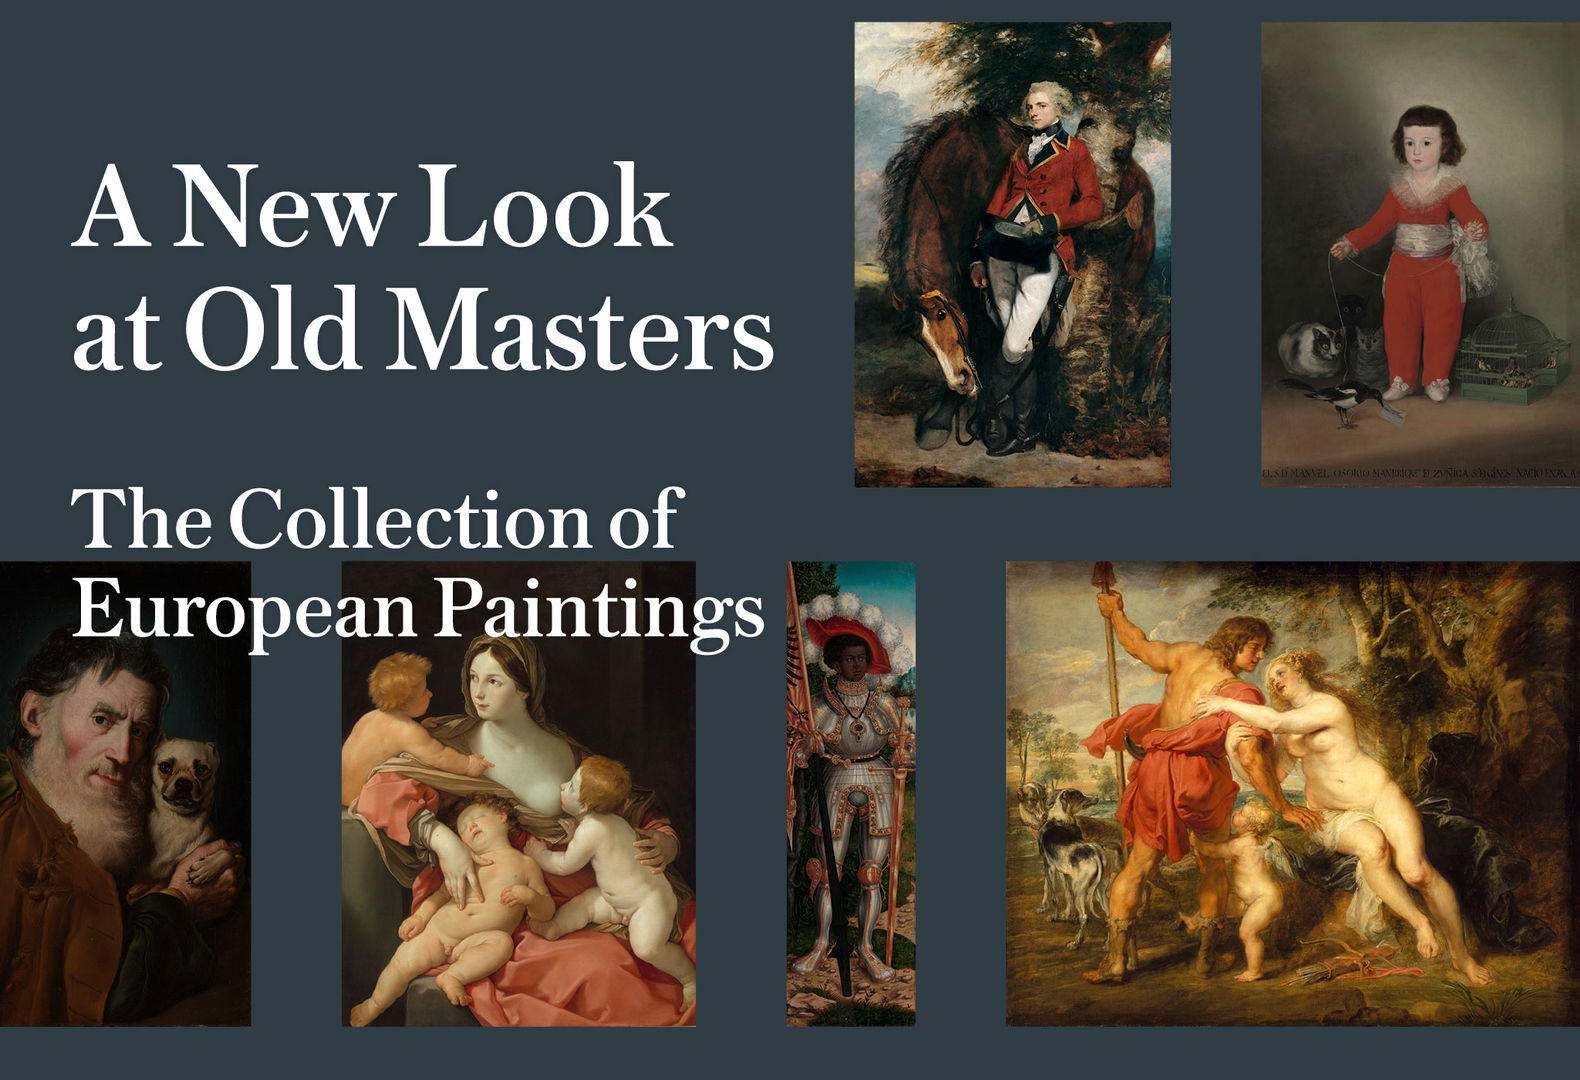 A loose grid of paintings depicting portraits and landscapes are digitally collaged on a dark grayish cyan blue background color; the text “A New Look at Old Masters The Collection of European Paintings” appears in overlay.